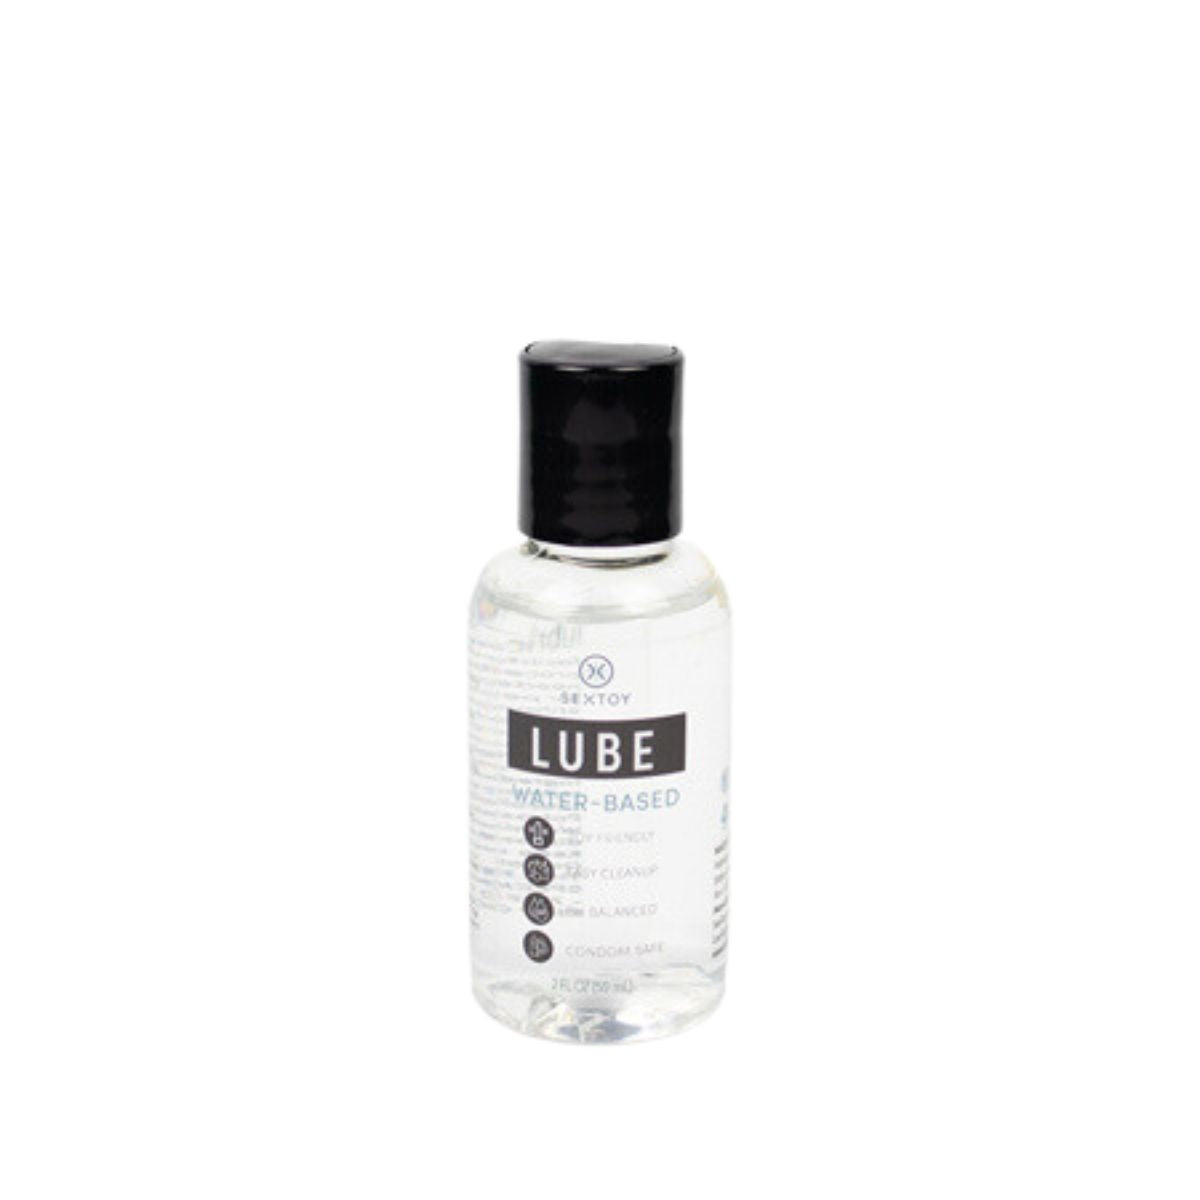 SexToy Lube Water-Based Lubricant - All Sizes